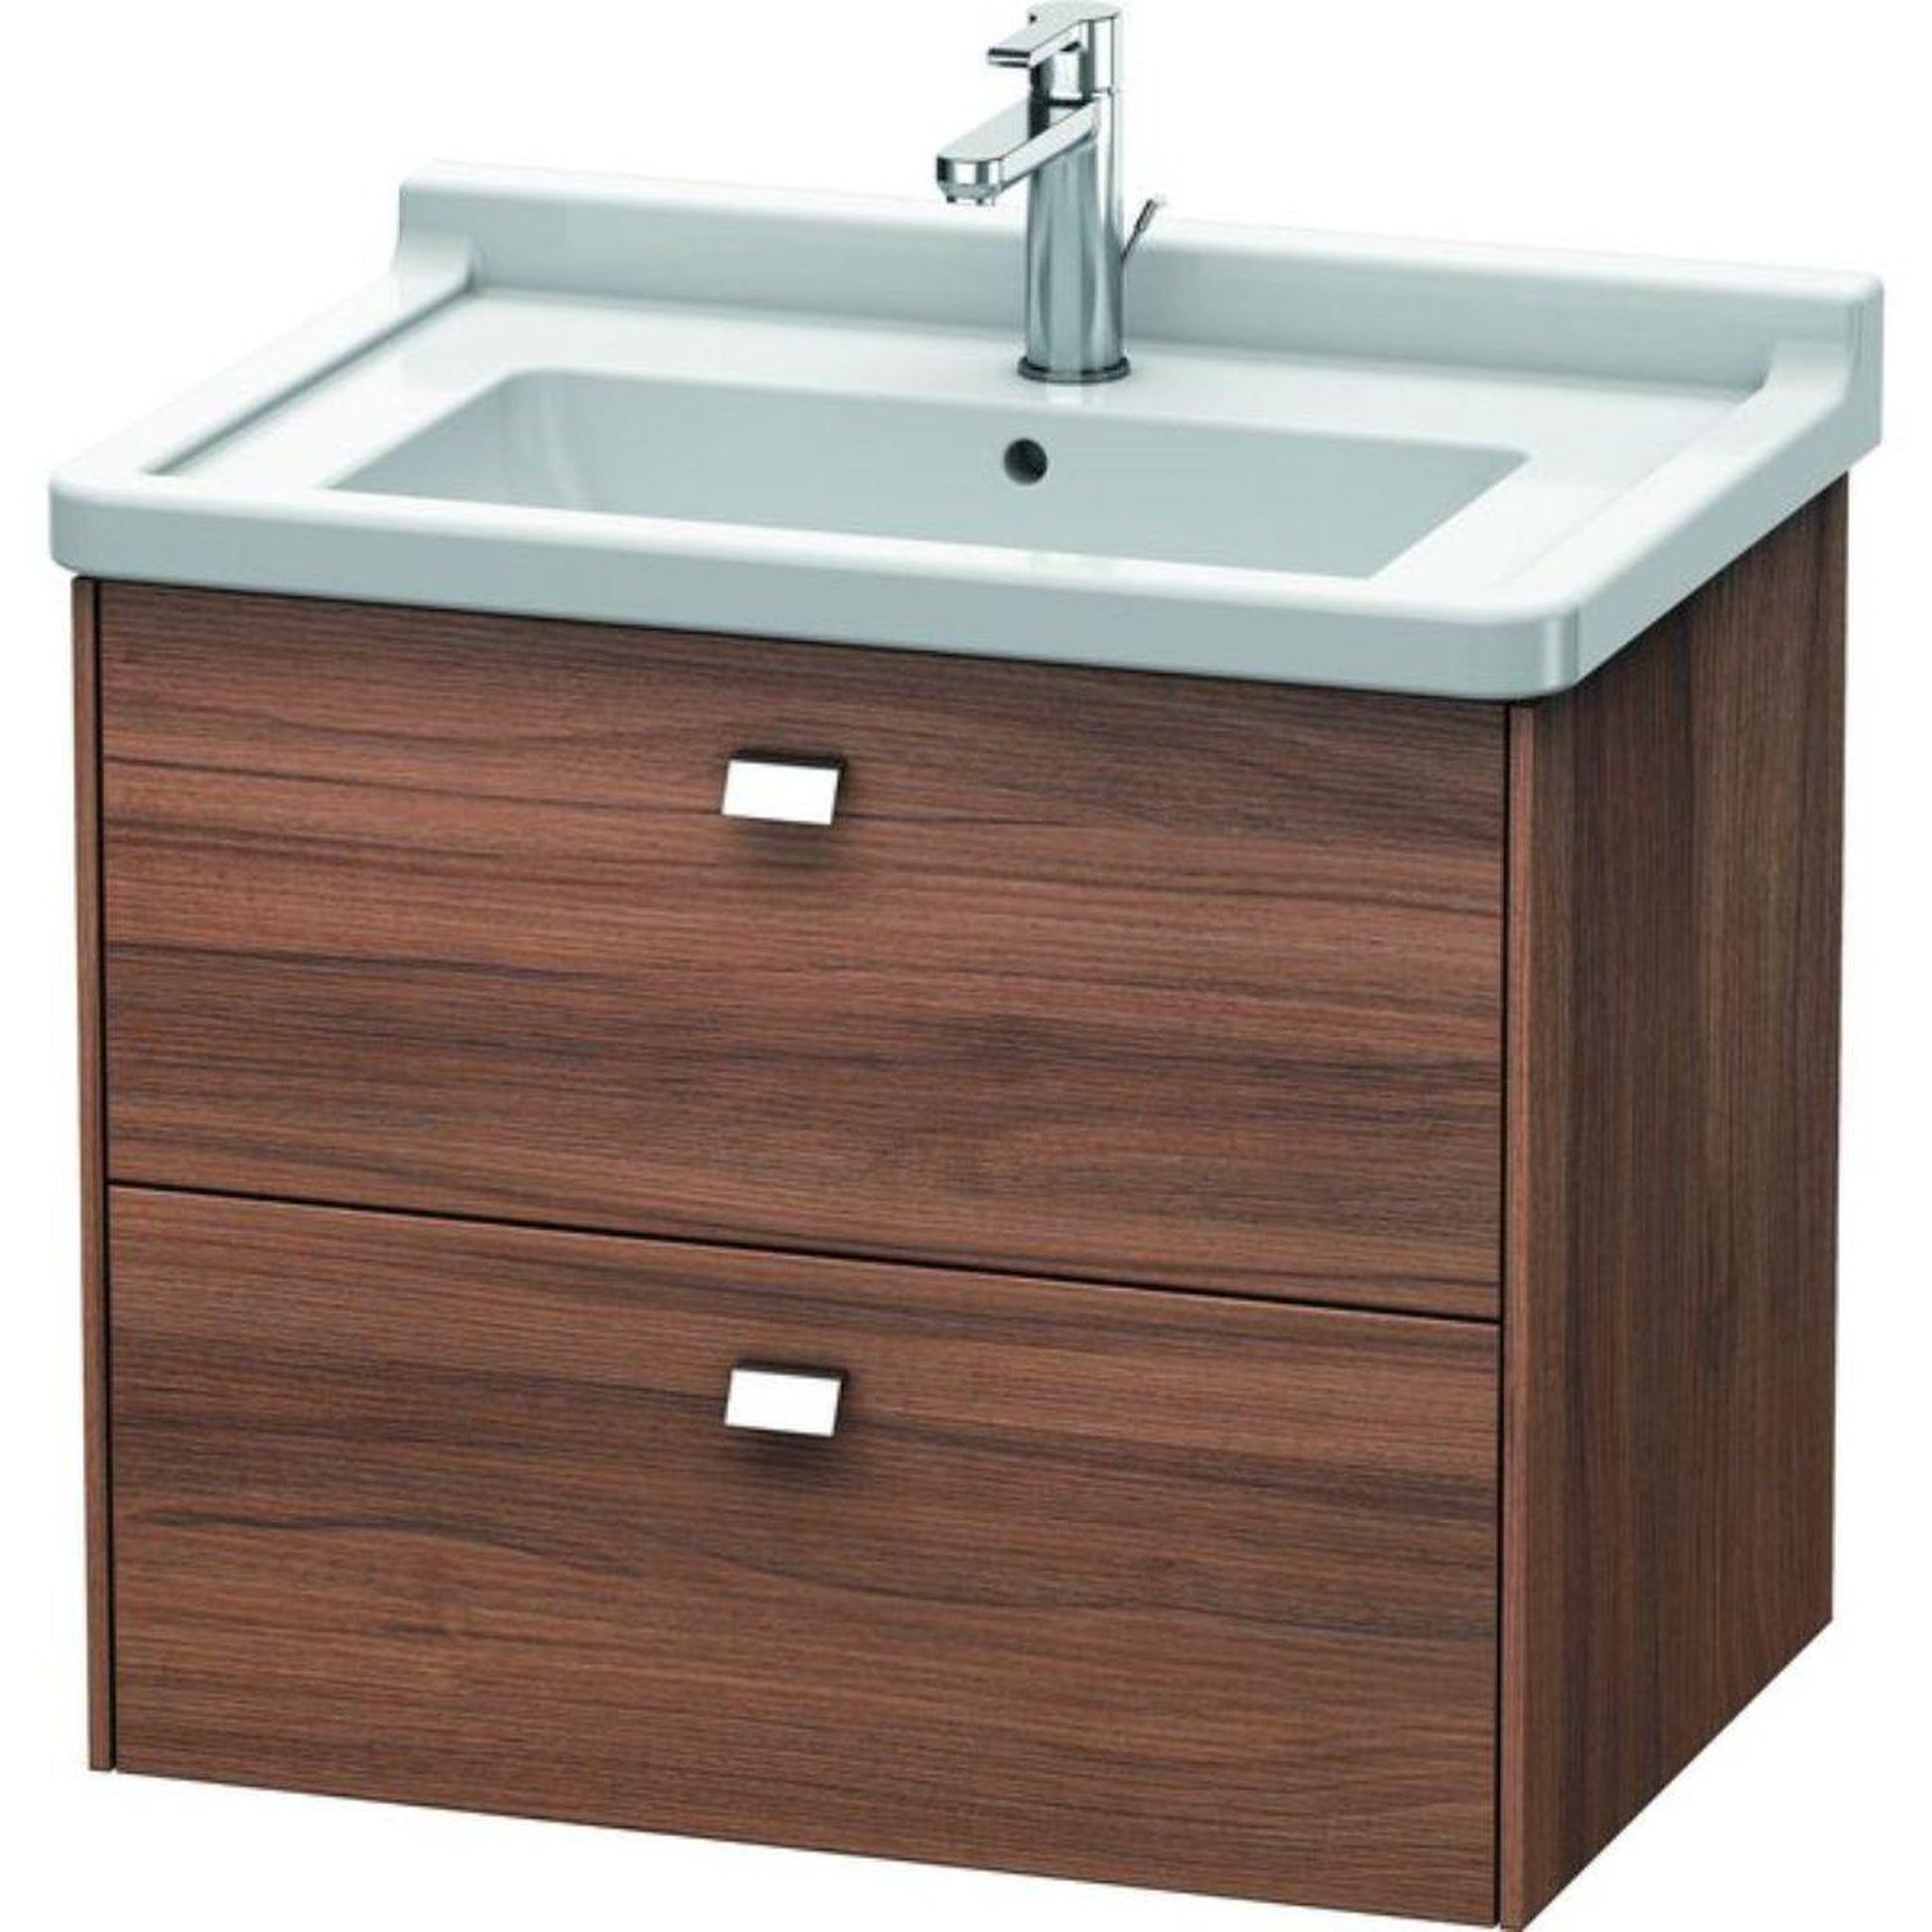 Duravit Brioso BR41410 26" x 22" x 18" Two Drawer Wall-Mount Vanity Unit in Natural Walnut and Chrome Handle